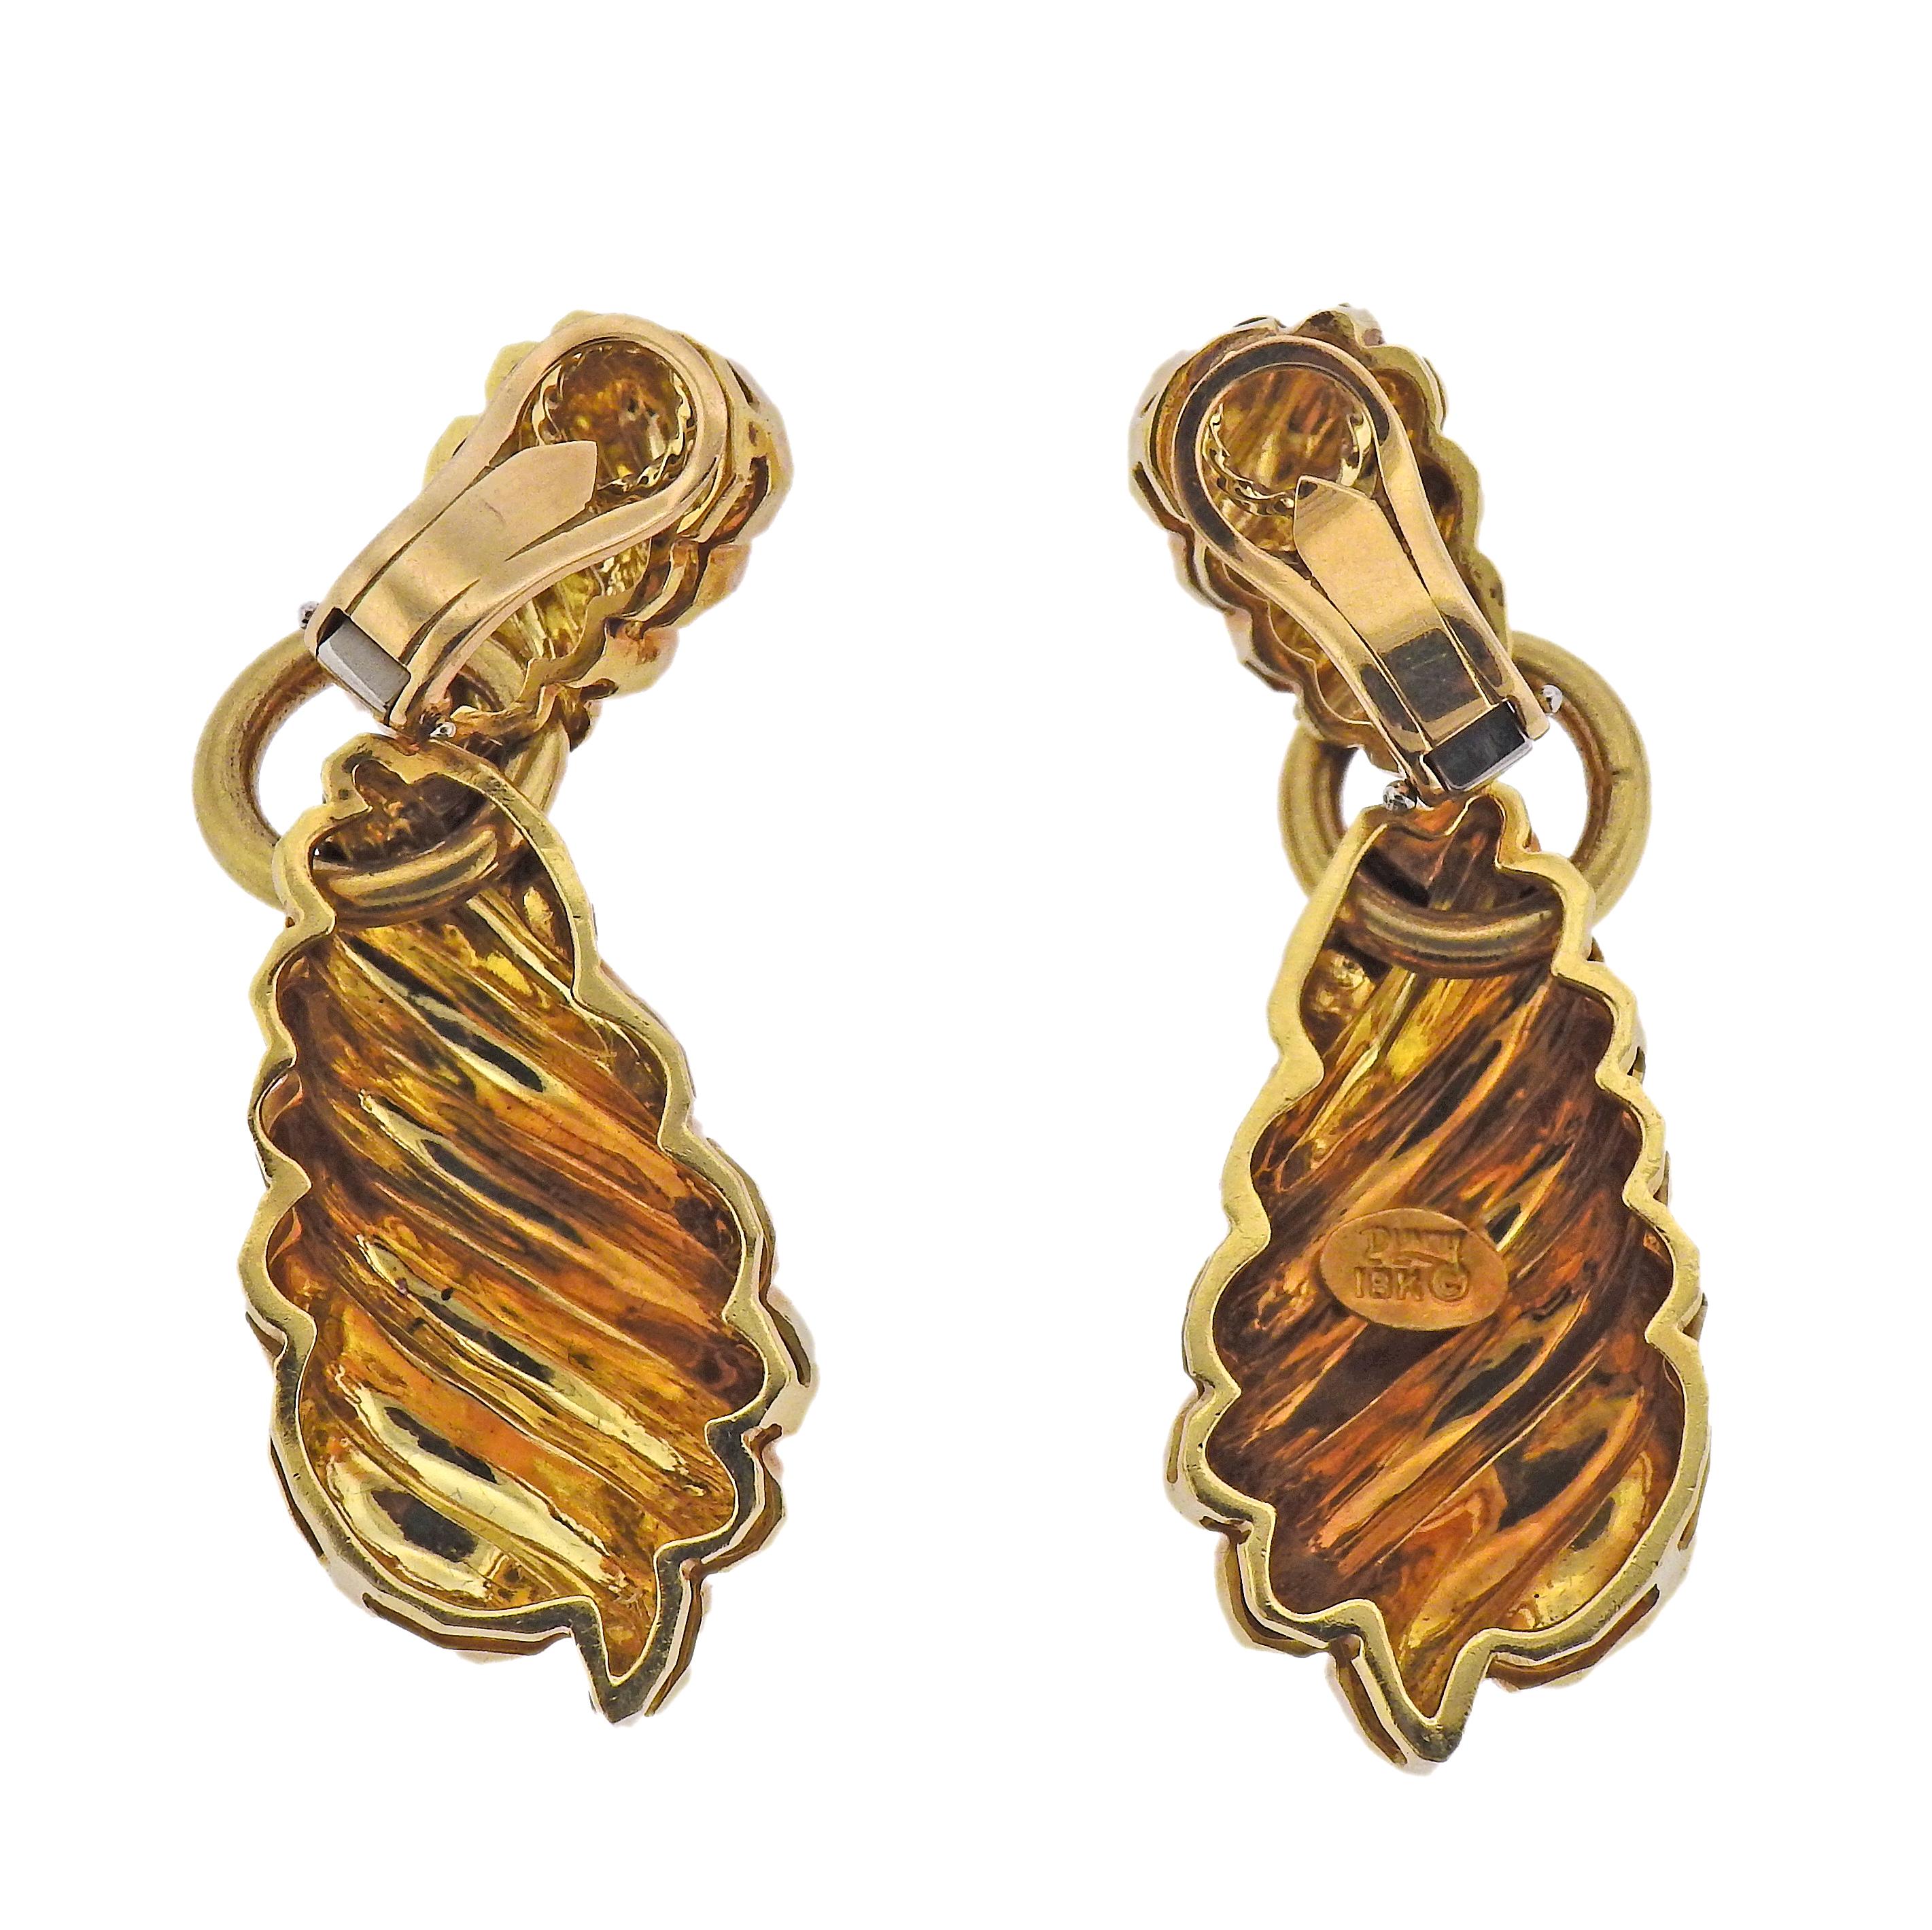 Pair of 18k yellow hammered gold drop earrings by Henry Dunay. Earrings measure 50mm x 20mm. Marked: 18k Dunay. Weight - 36.8 grams. 